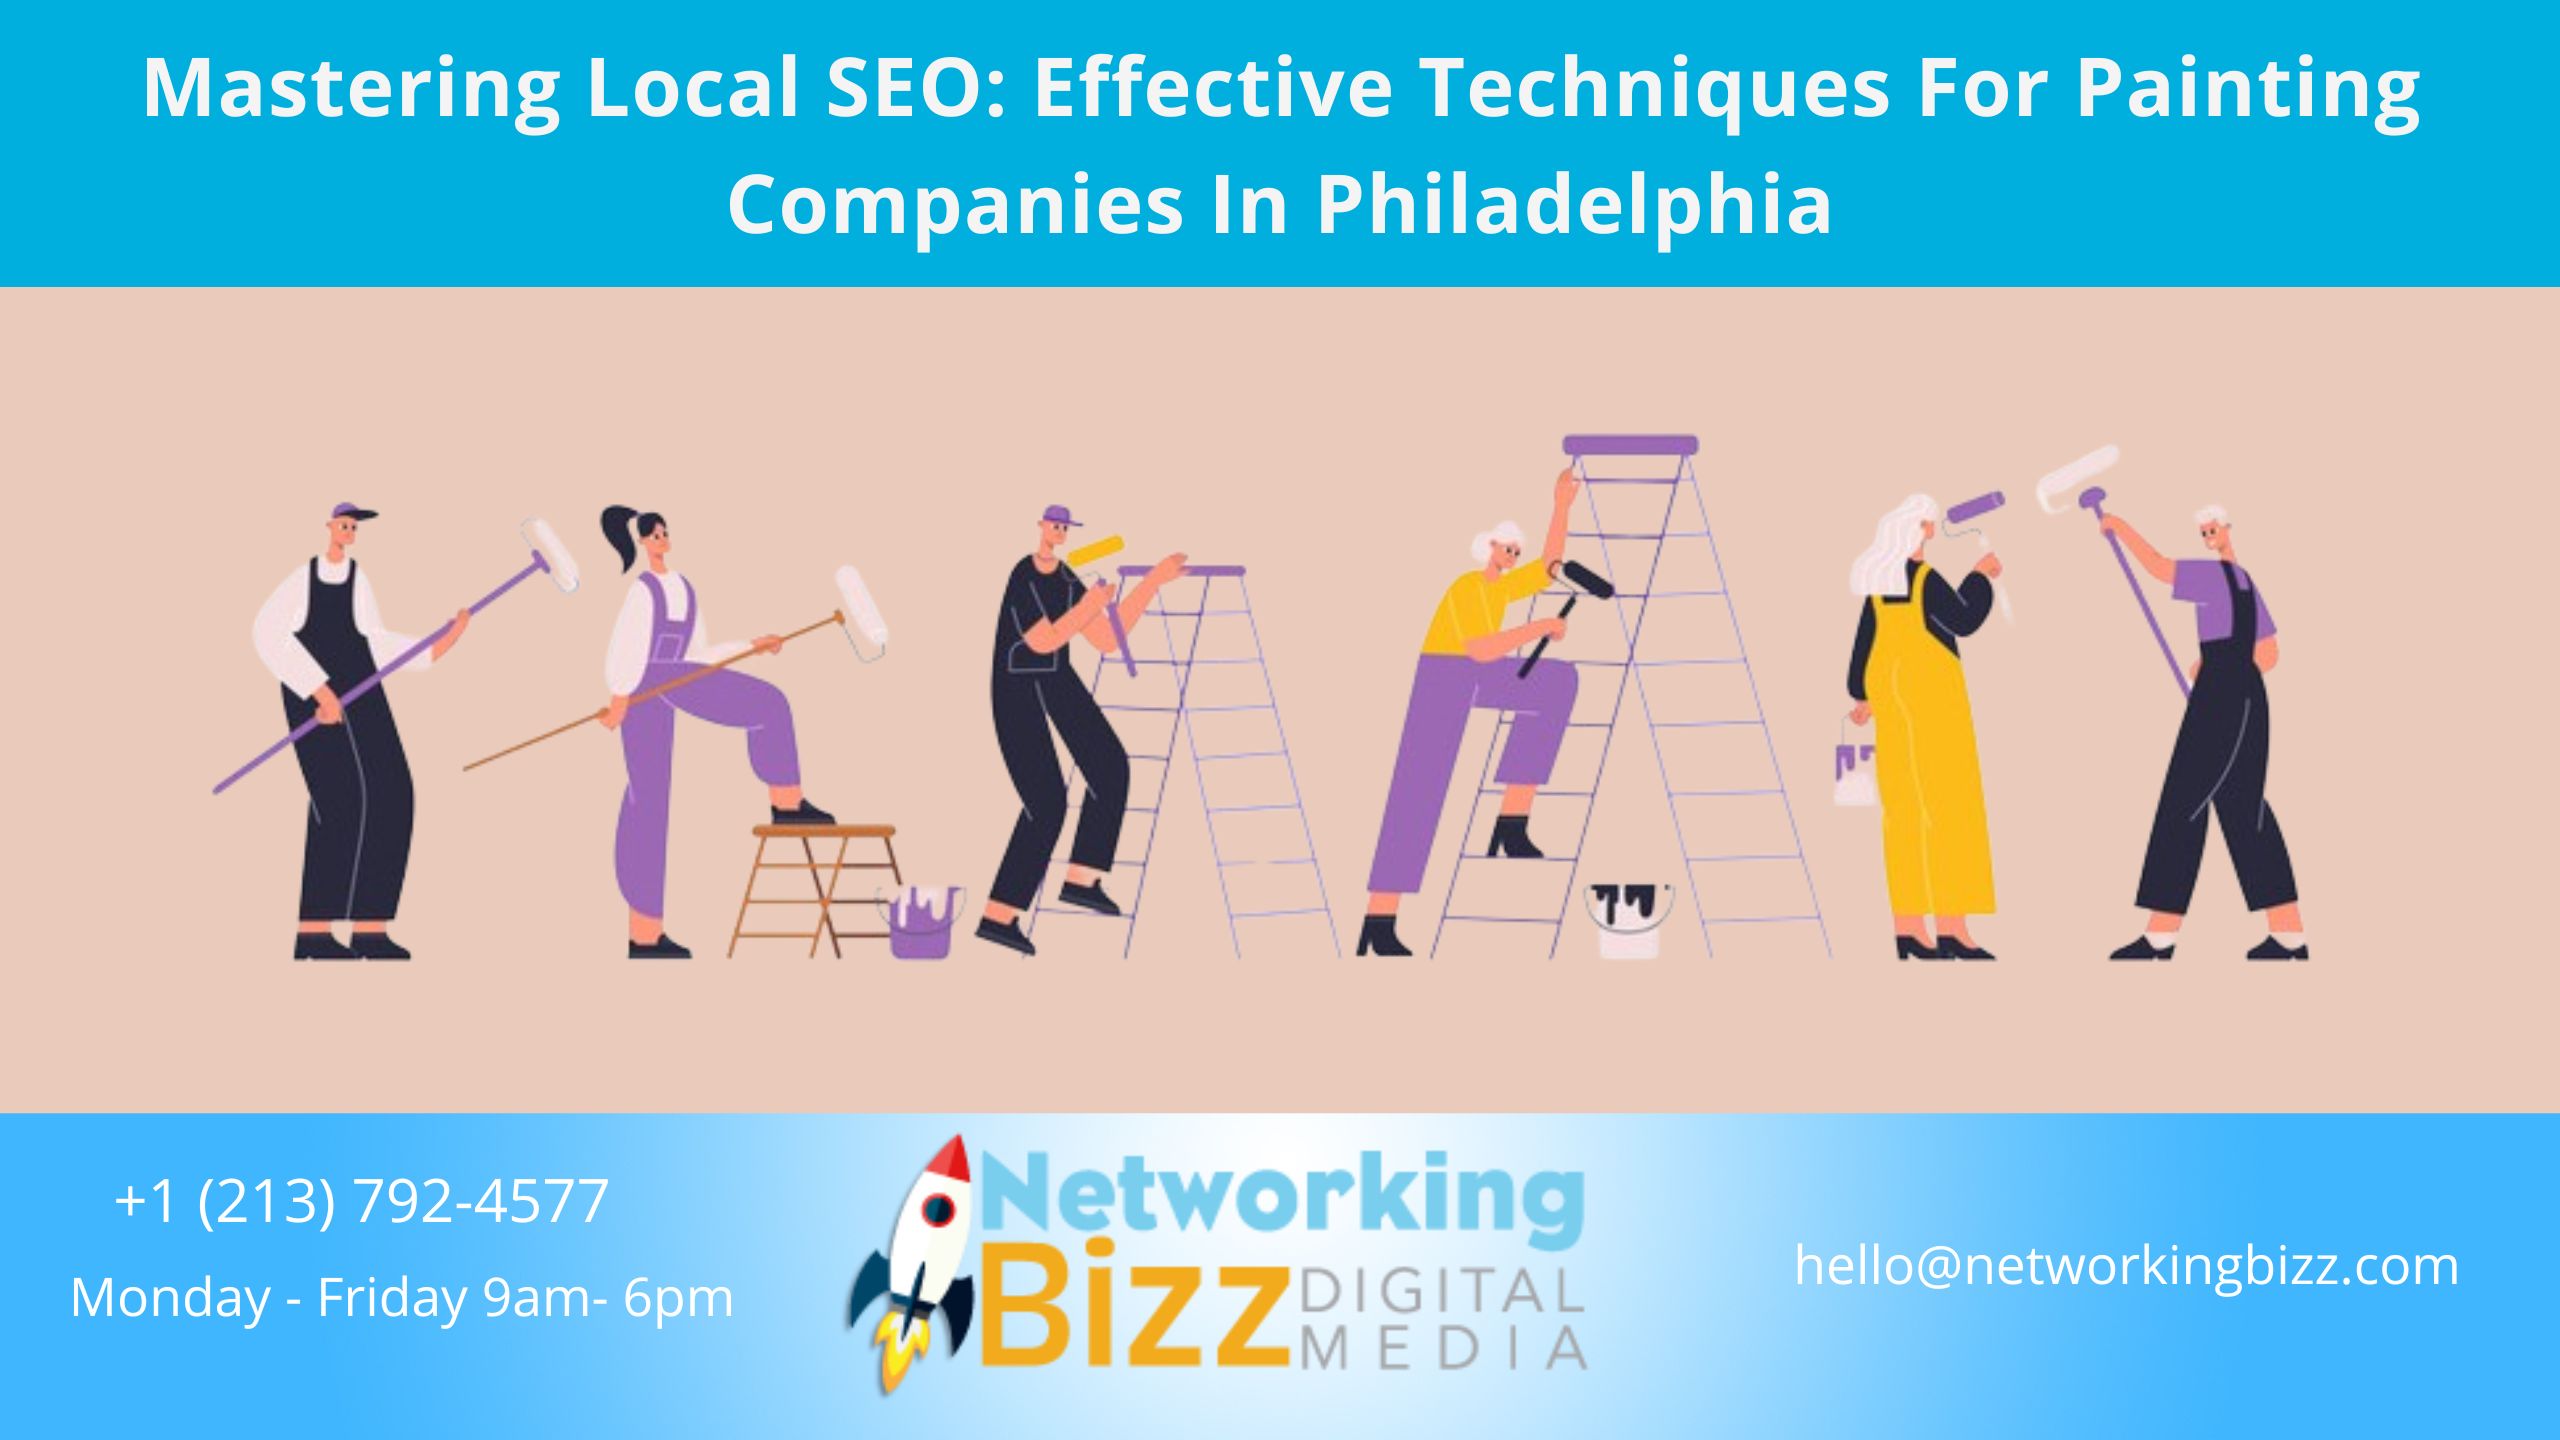 Mastering Local SEO: Effective Techniques For Painting Companies In Philadelphia